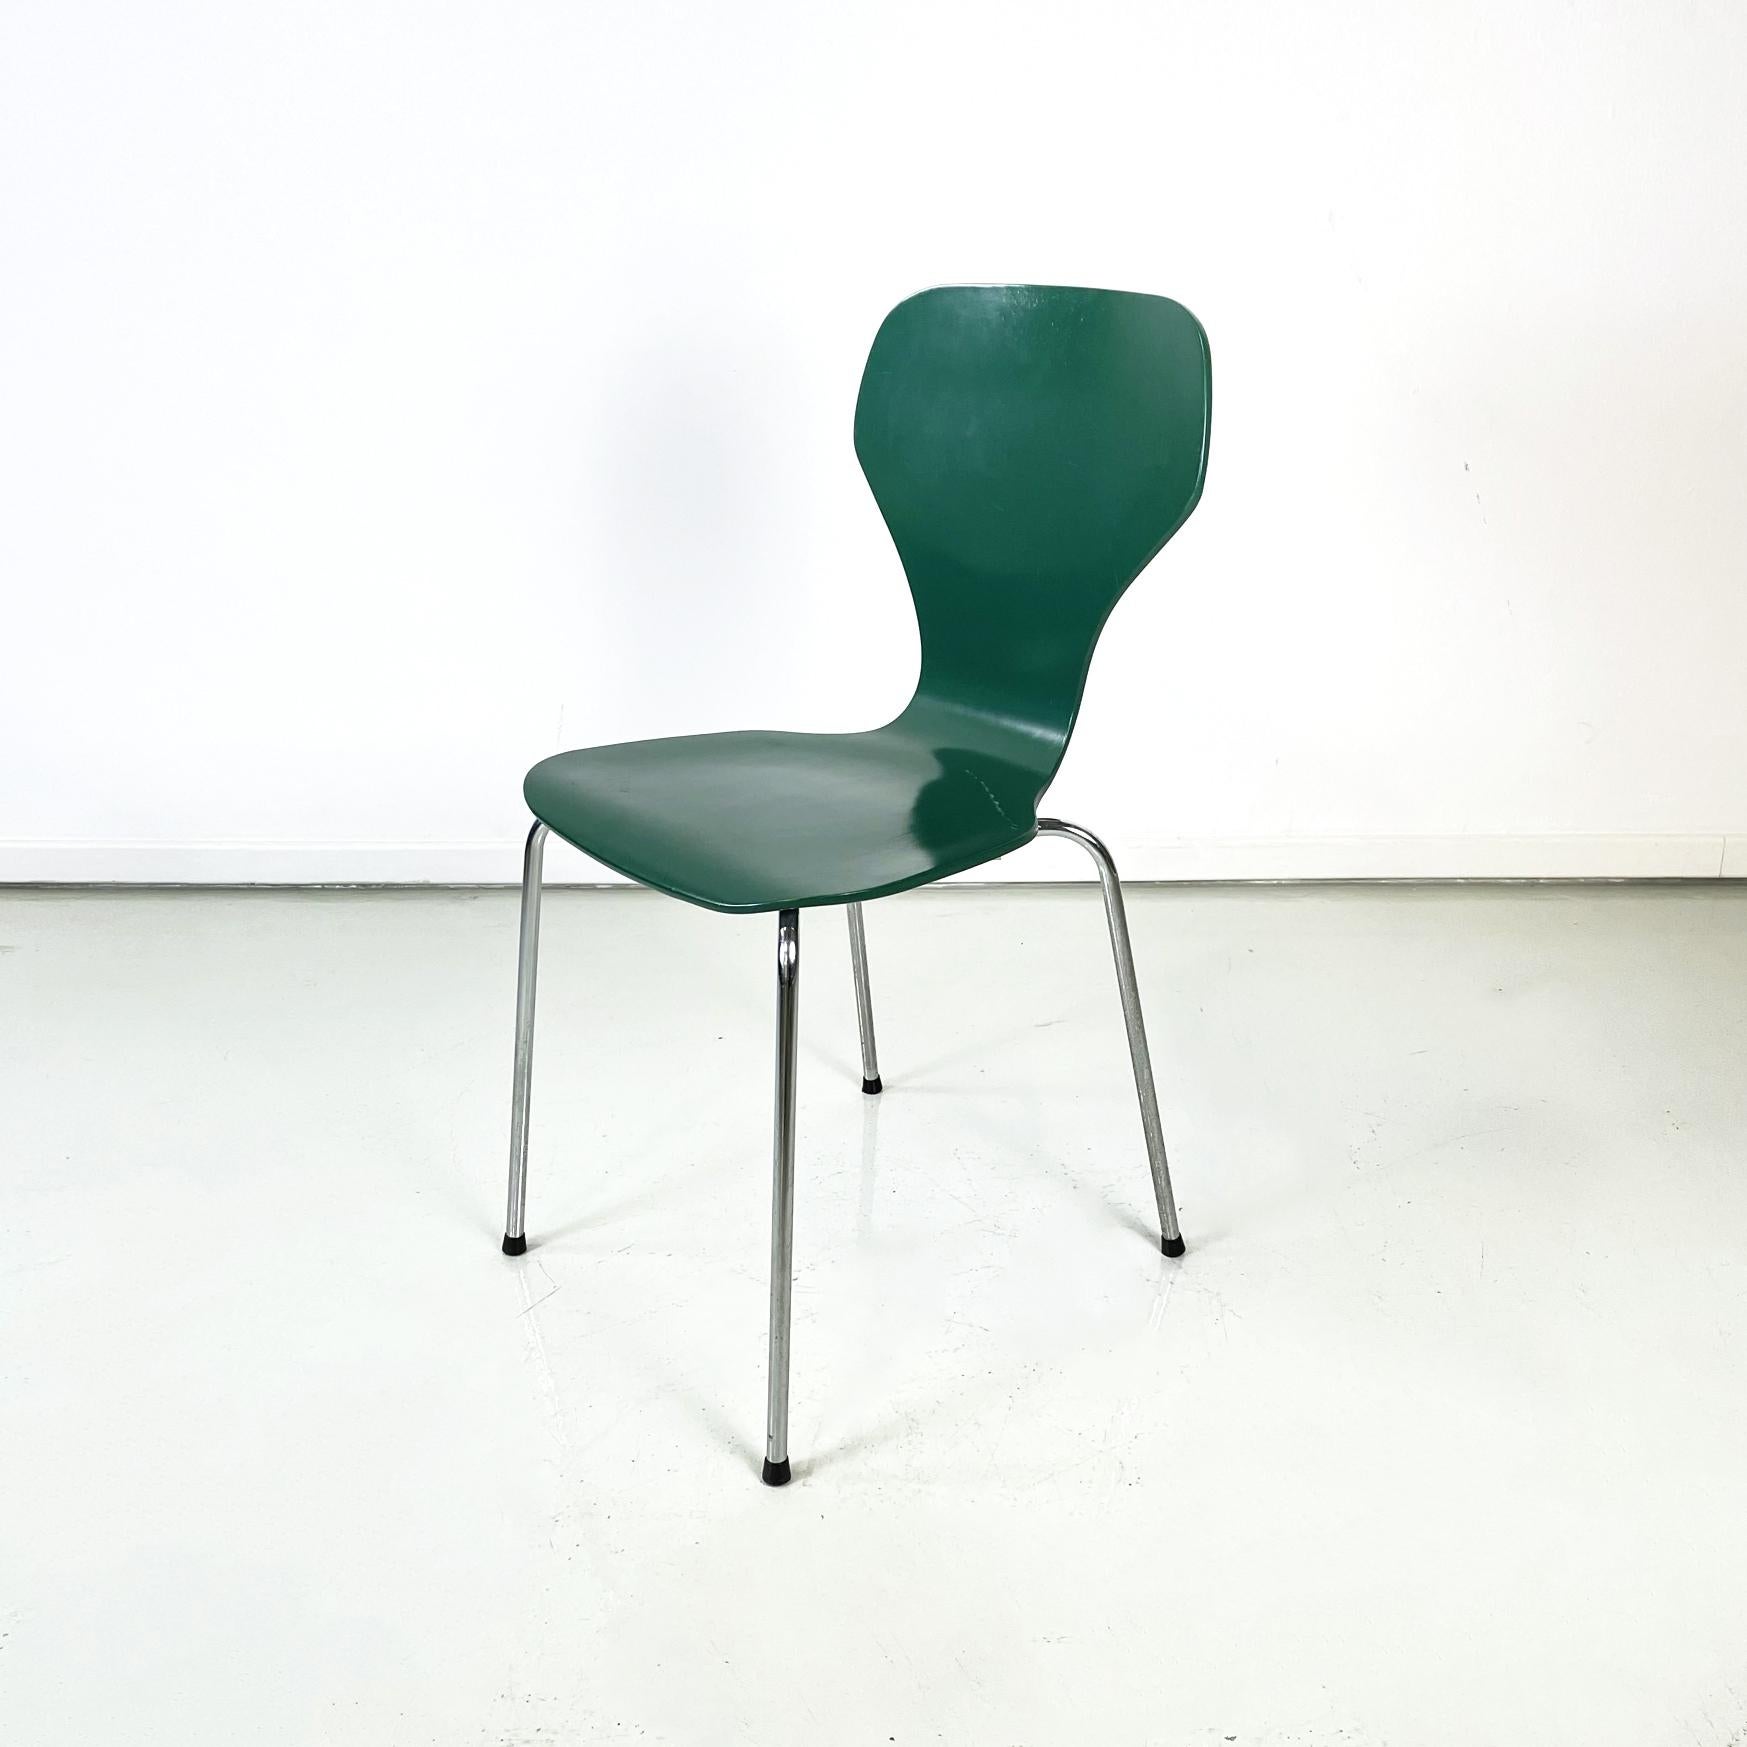 Danish modern green wooden and steel chairs by Phoenix, 1970s
Pair of Danish dining chairs in bent wood, painted in forest green. The legs are in steel with black rubber feet. Stackable.
They are produced by Phoenix in 1970s. Label present under